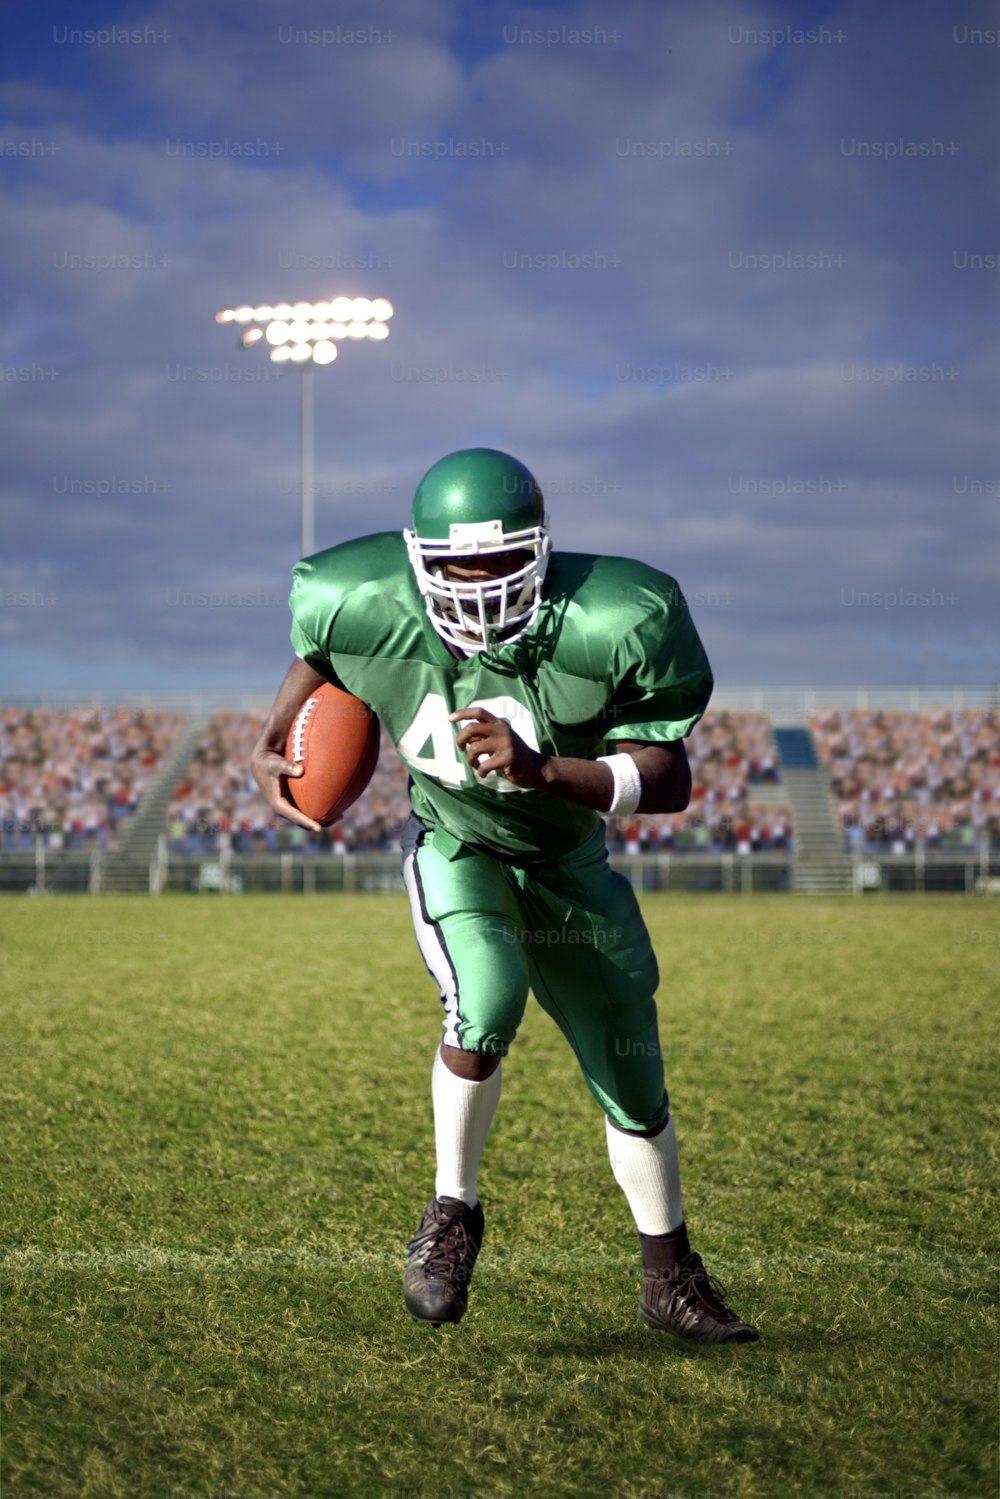 a football player holding a ball on a field